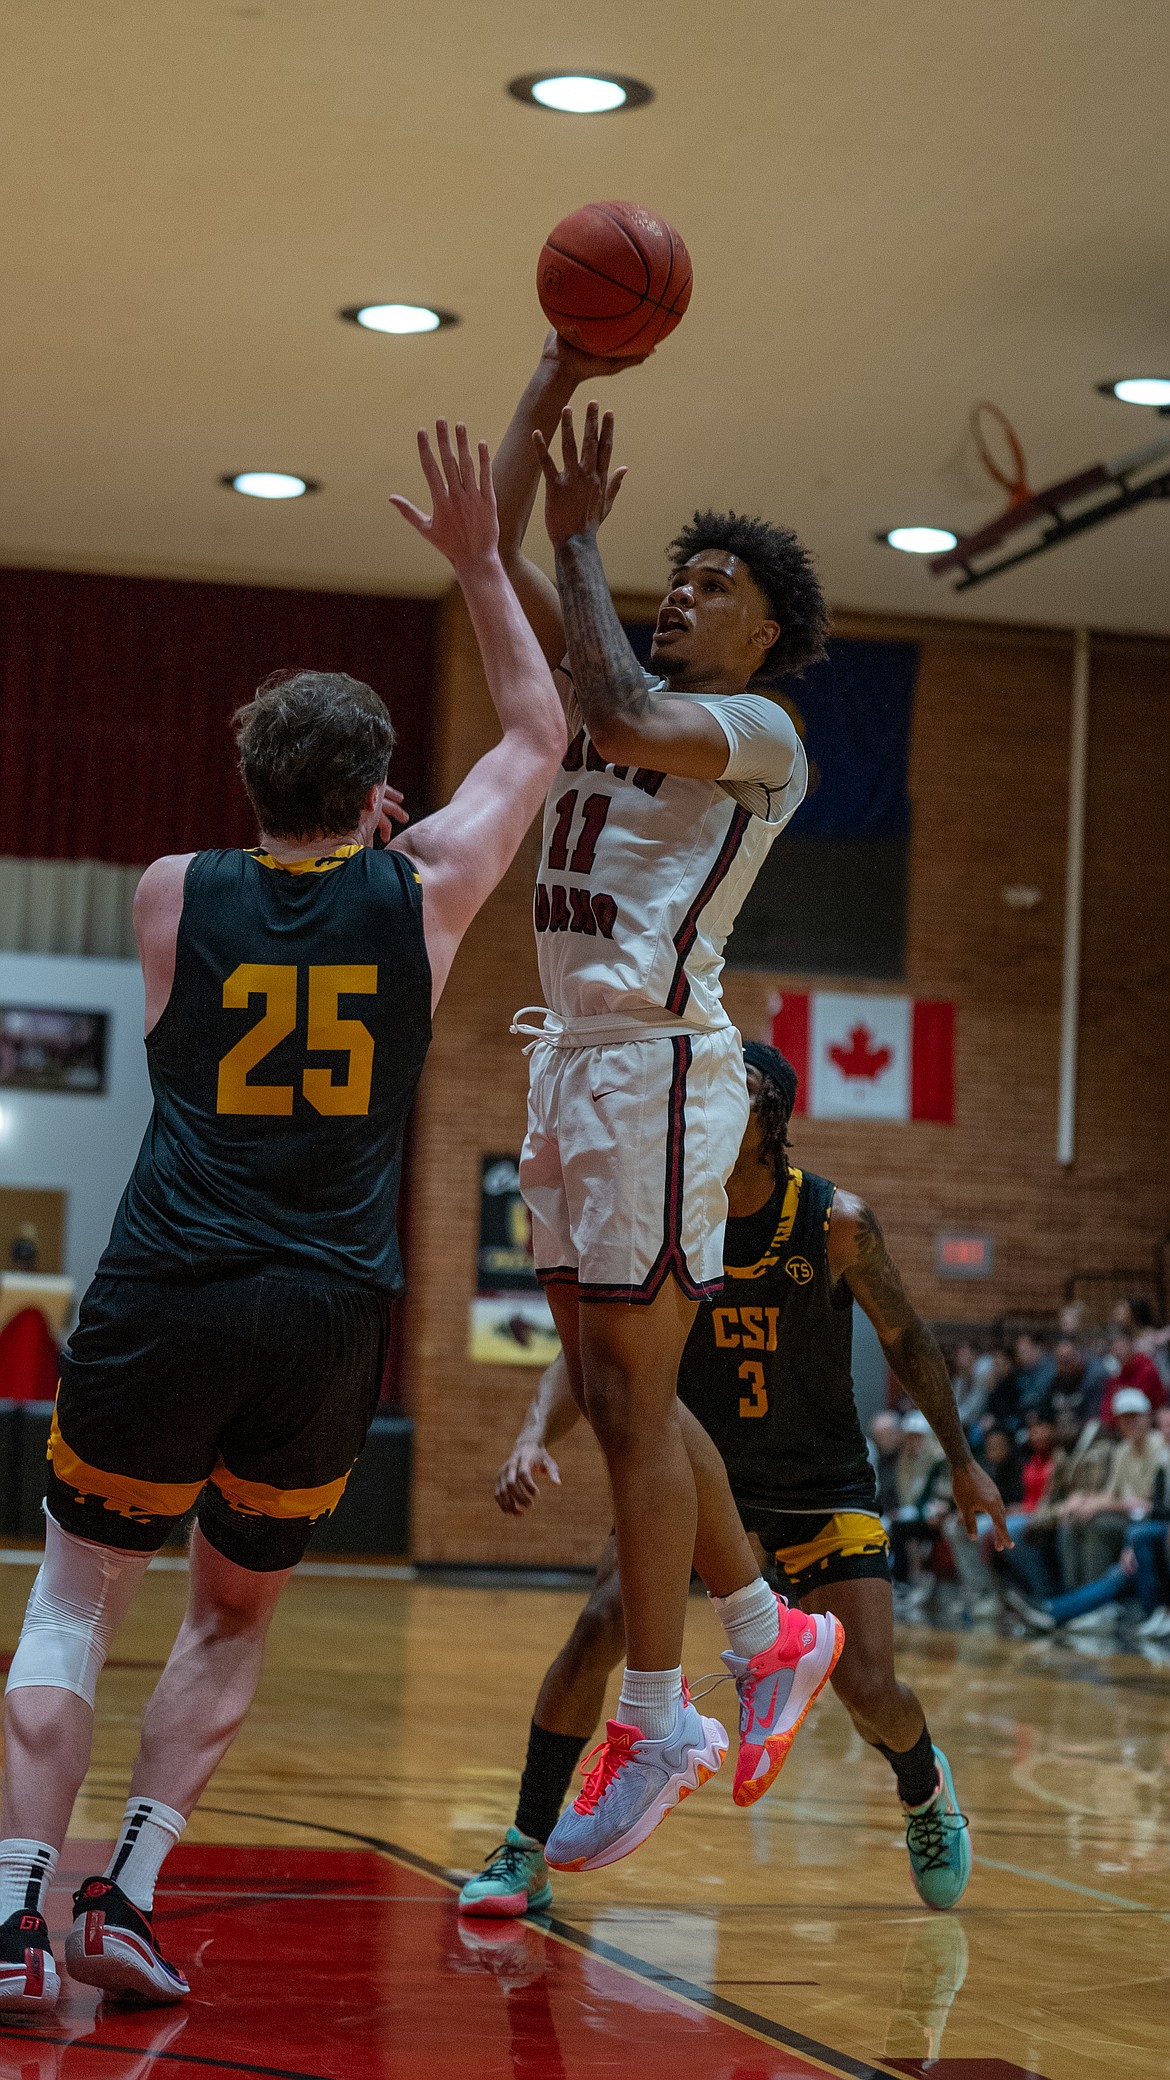 NIC ATHLETICS
North Idaho College sophomore guard Dante Sawyer shoots over Southern Idaho freshman Walker Timme during the first half of Saturday's Scenic West Athletic Conference game at Rolly Williams Court.